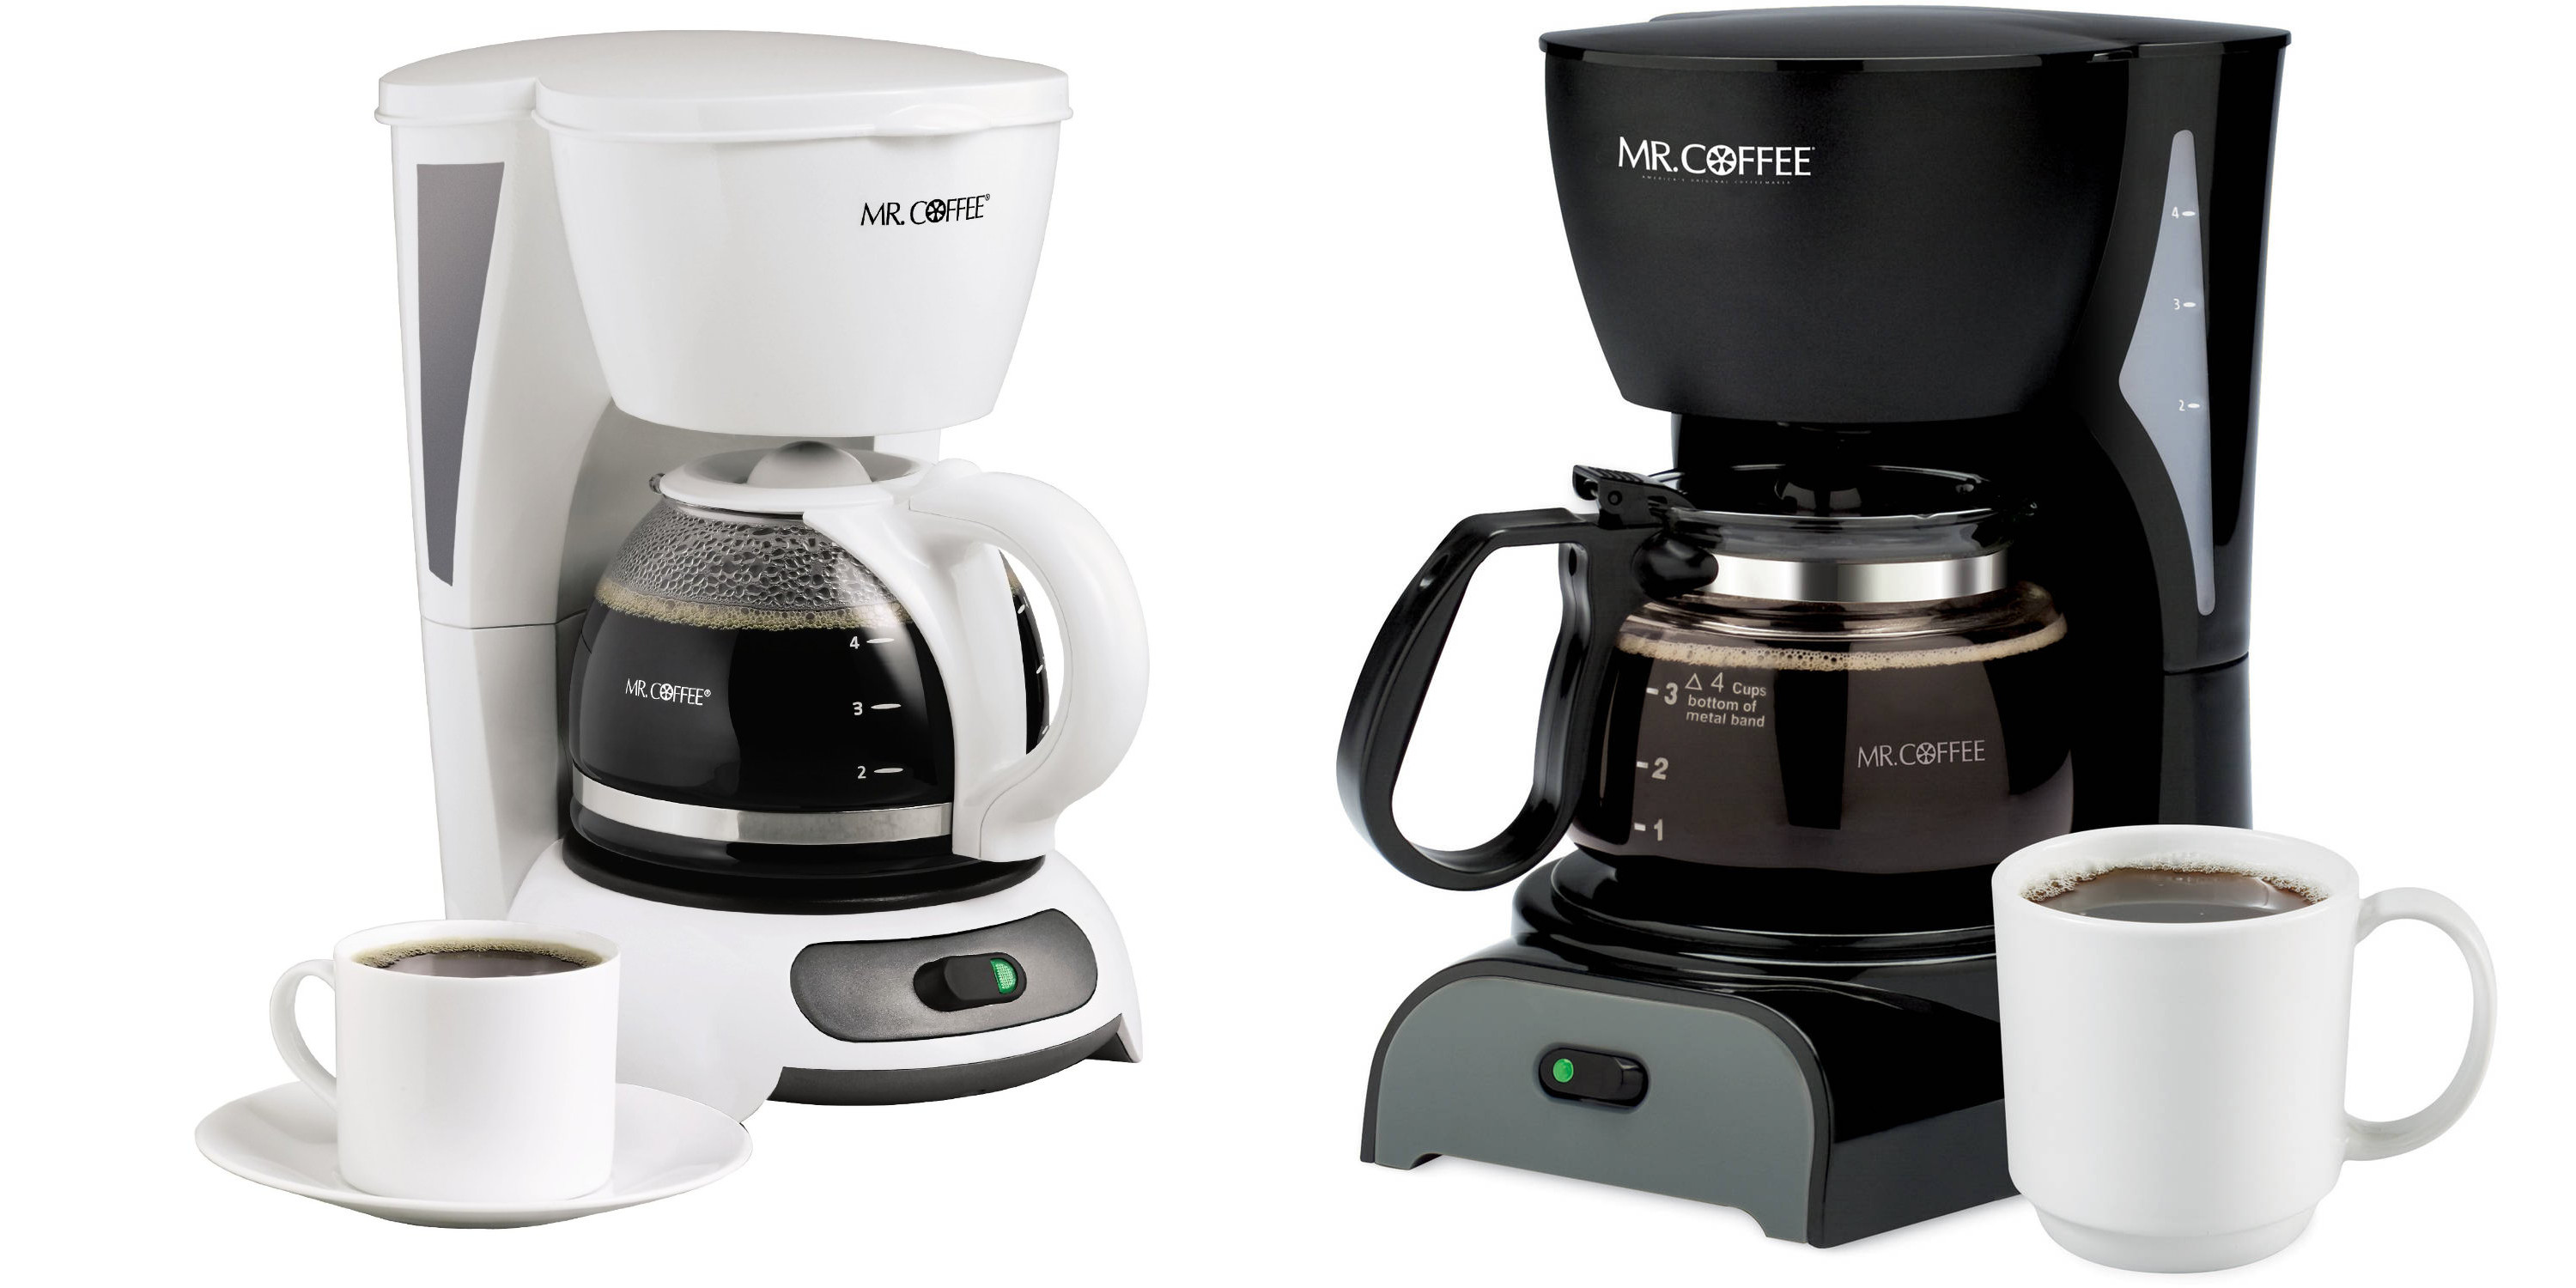 Grab one of these mini Mr. Coffee 4-cup coffee makers from just